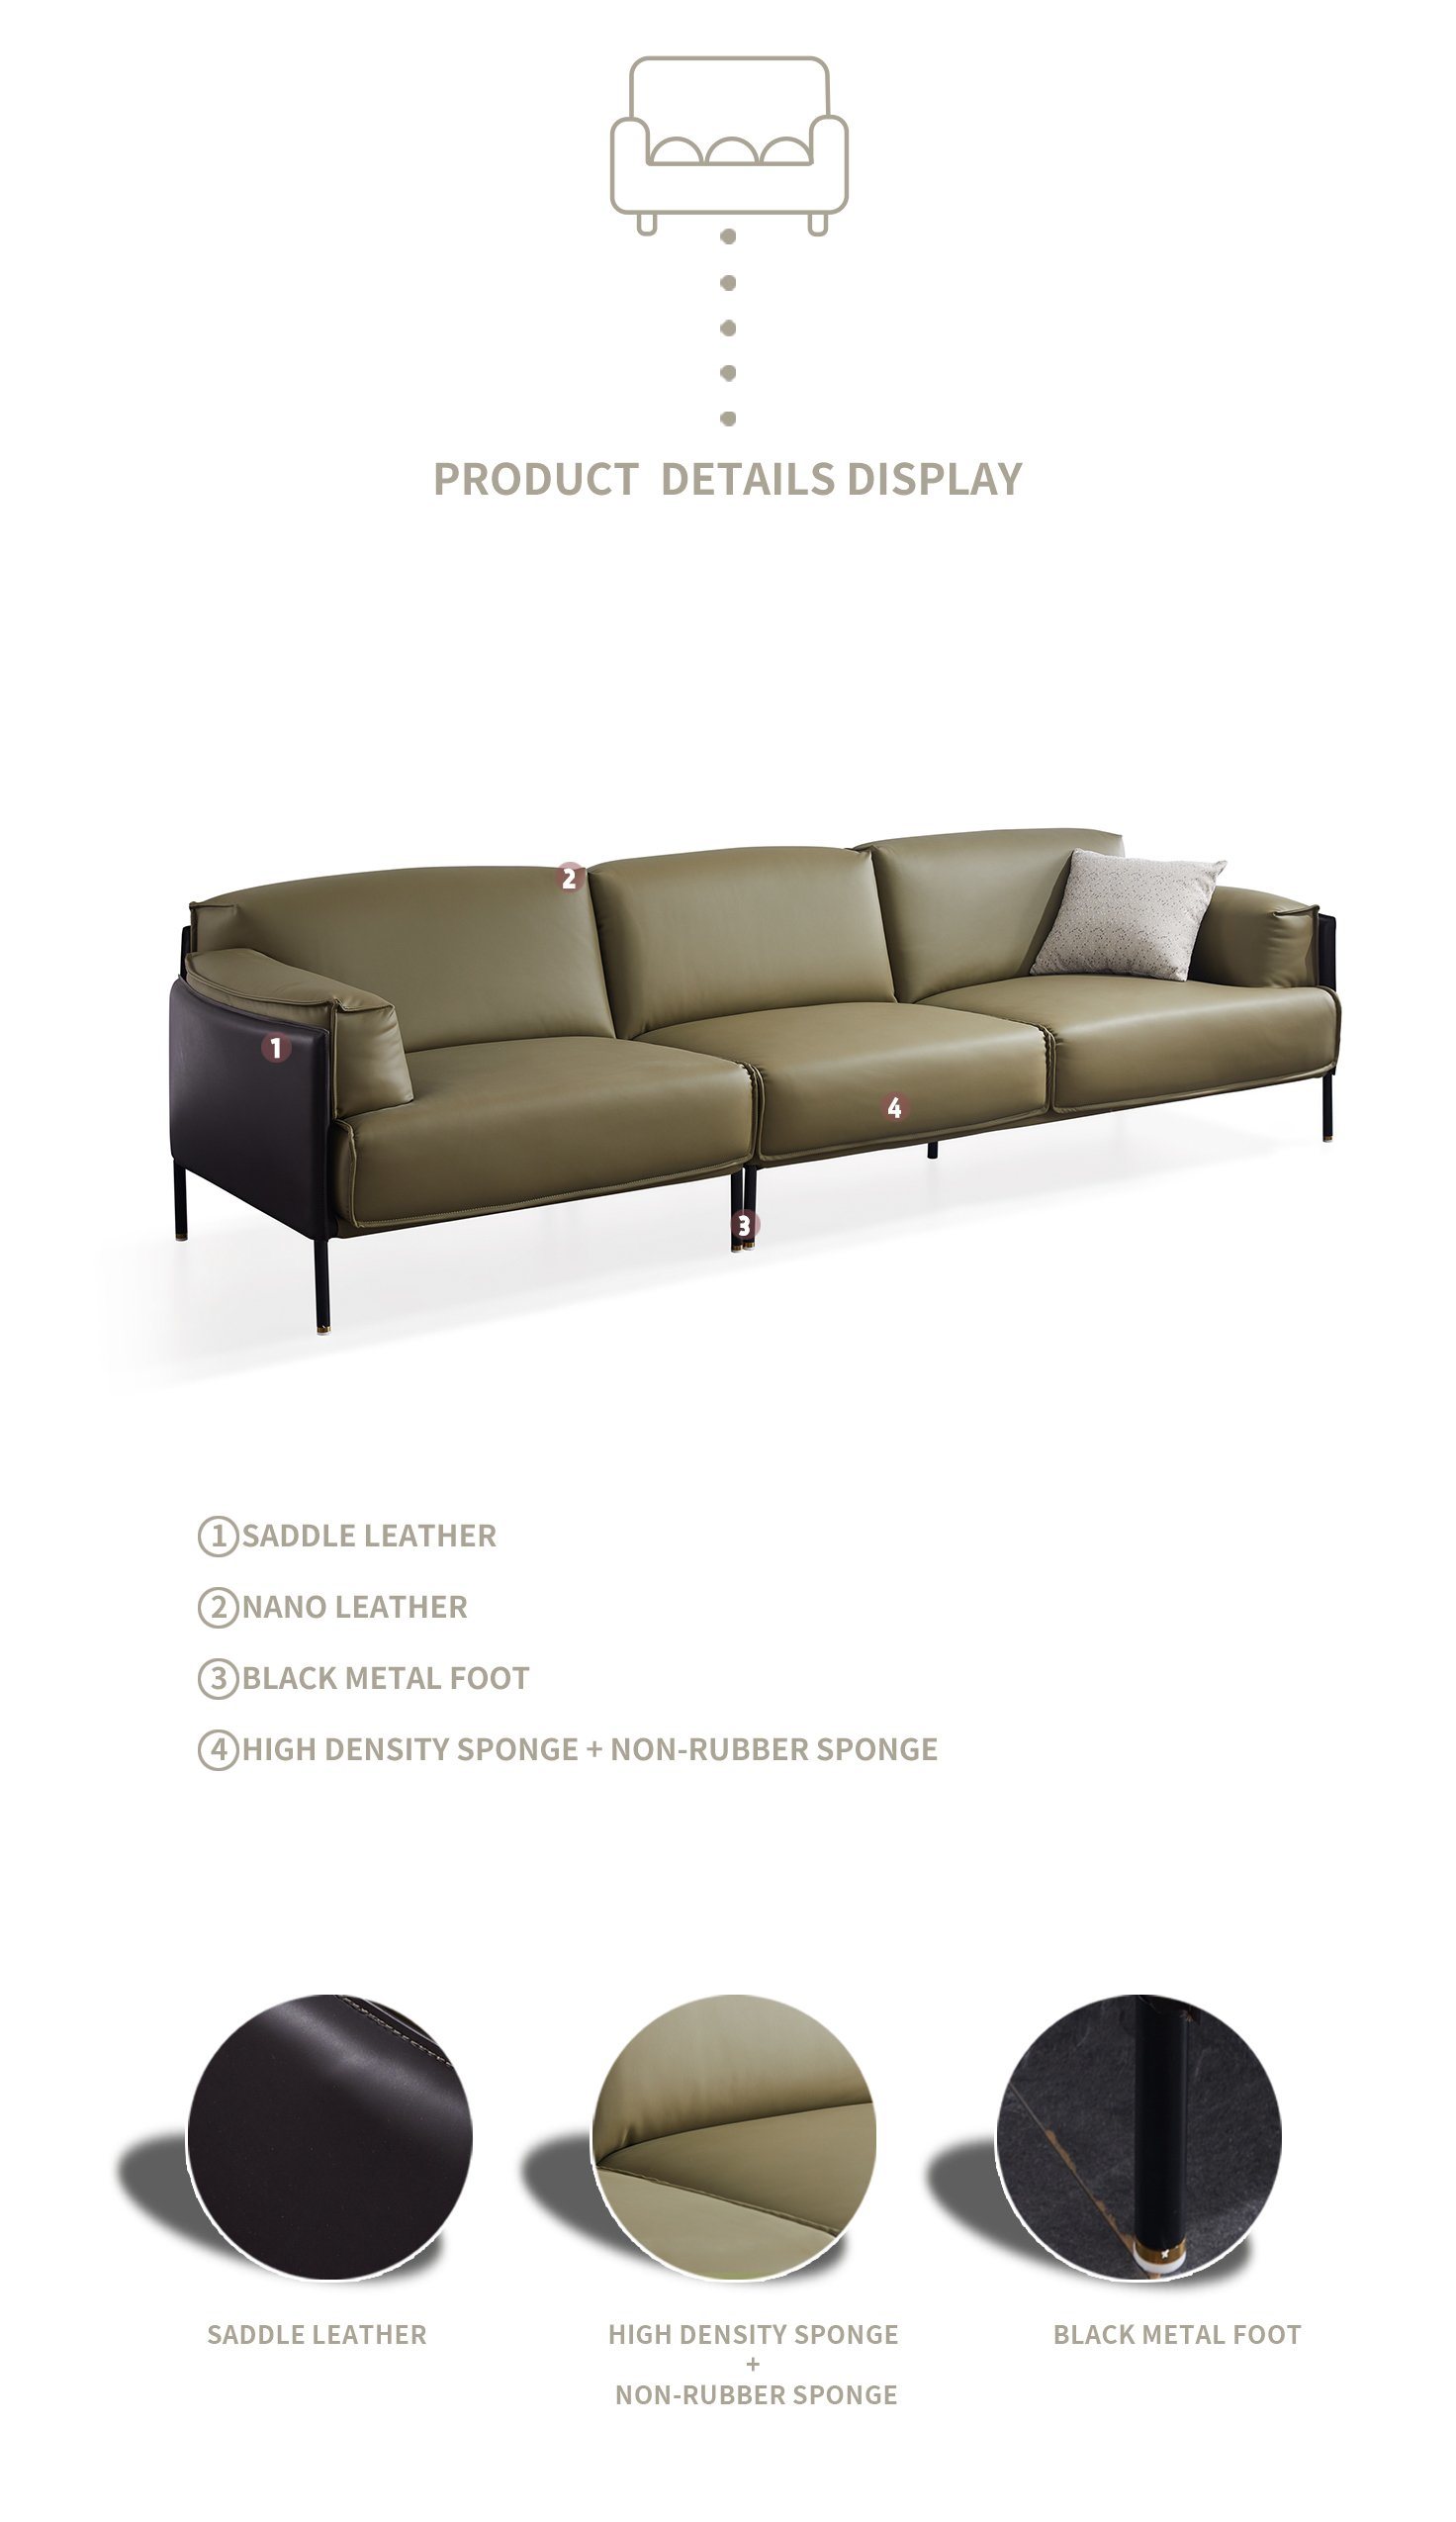 Modern Design Home Furniture Living Room 4 Seater High Quality Leather Sofa